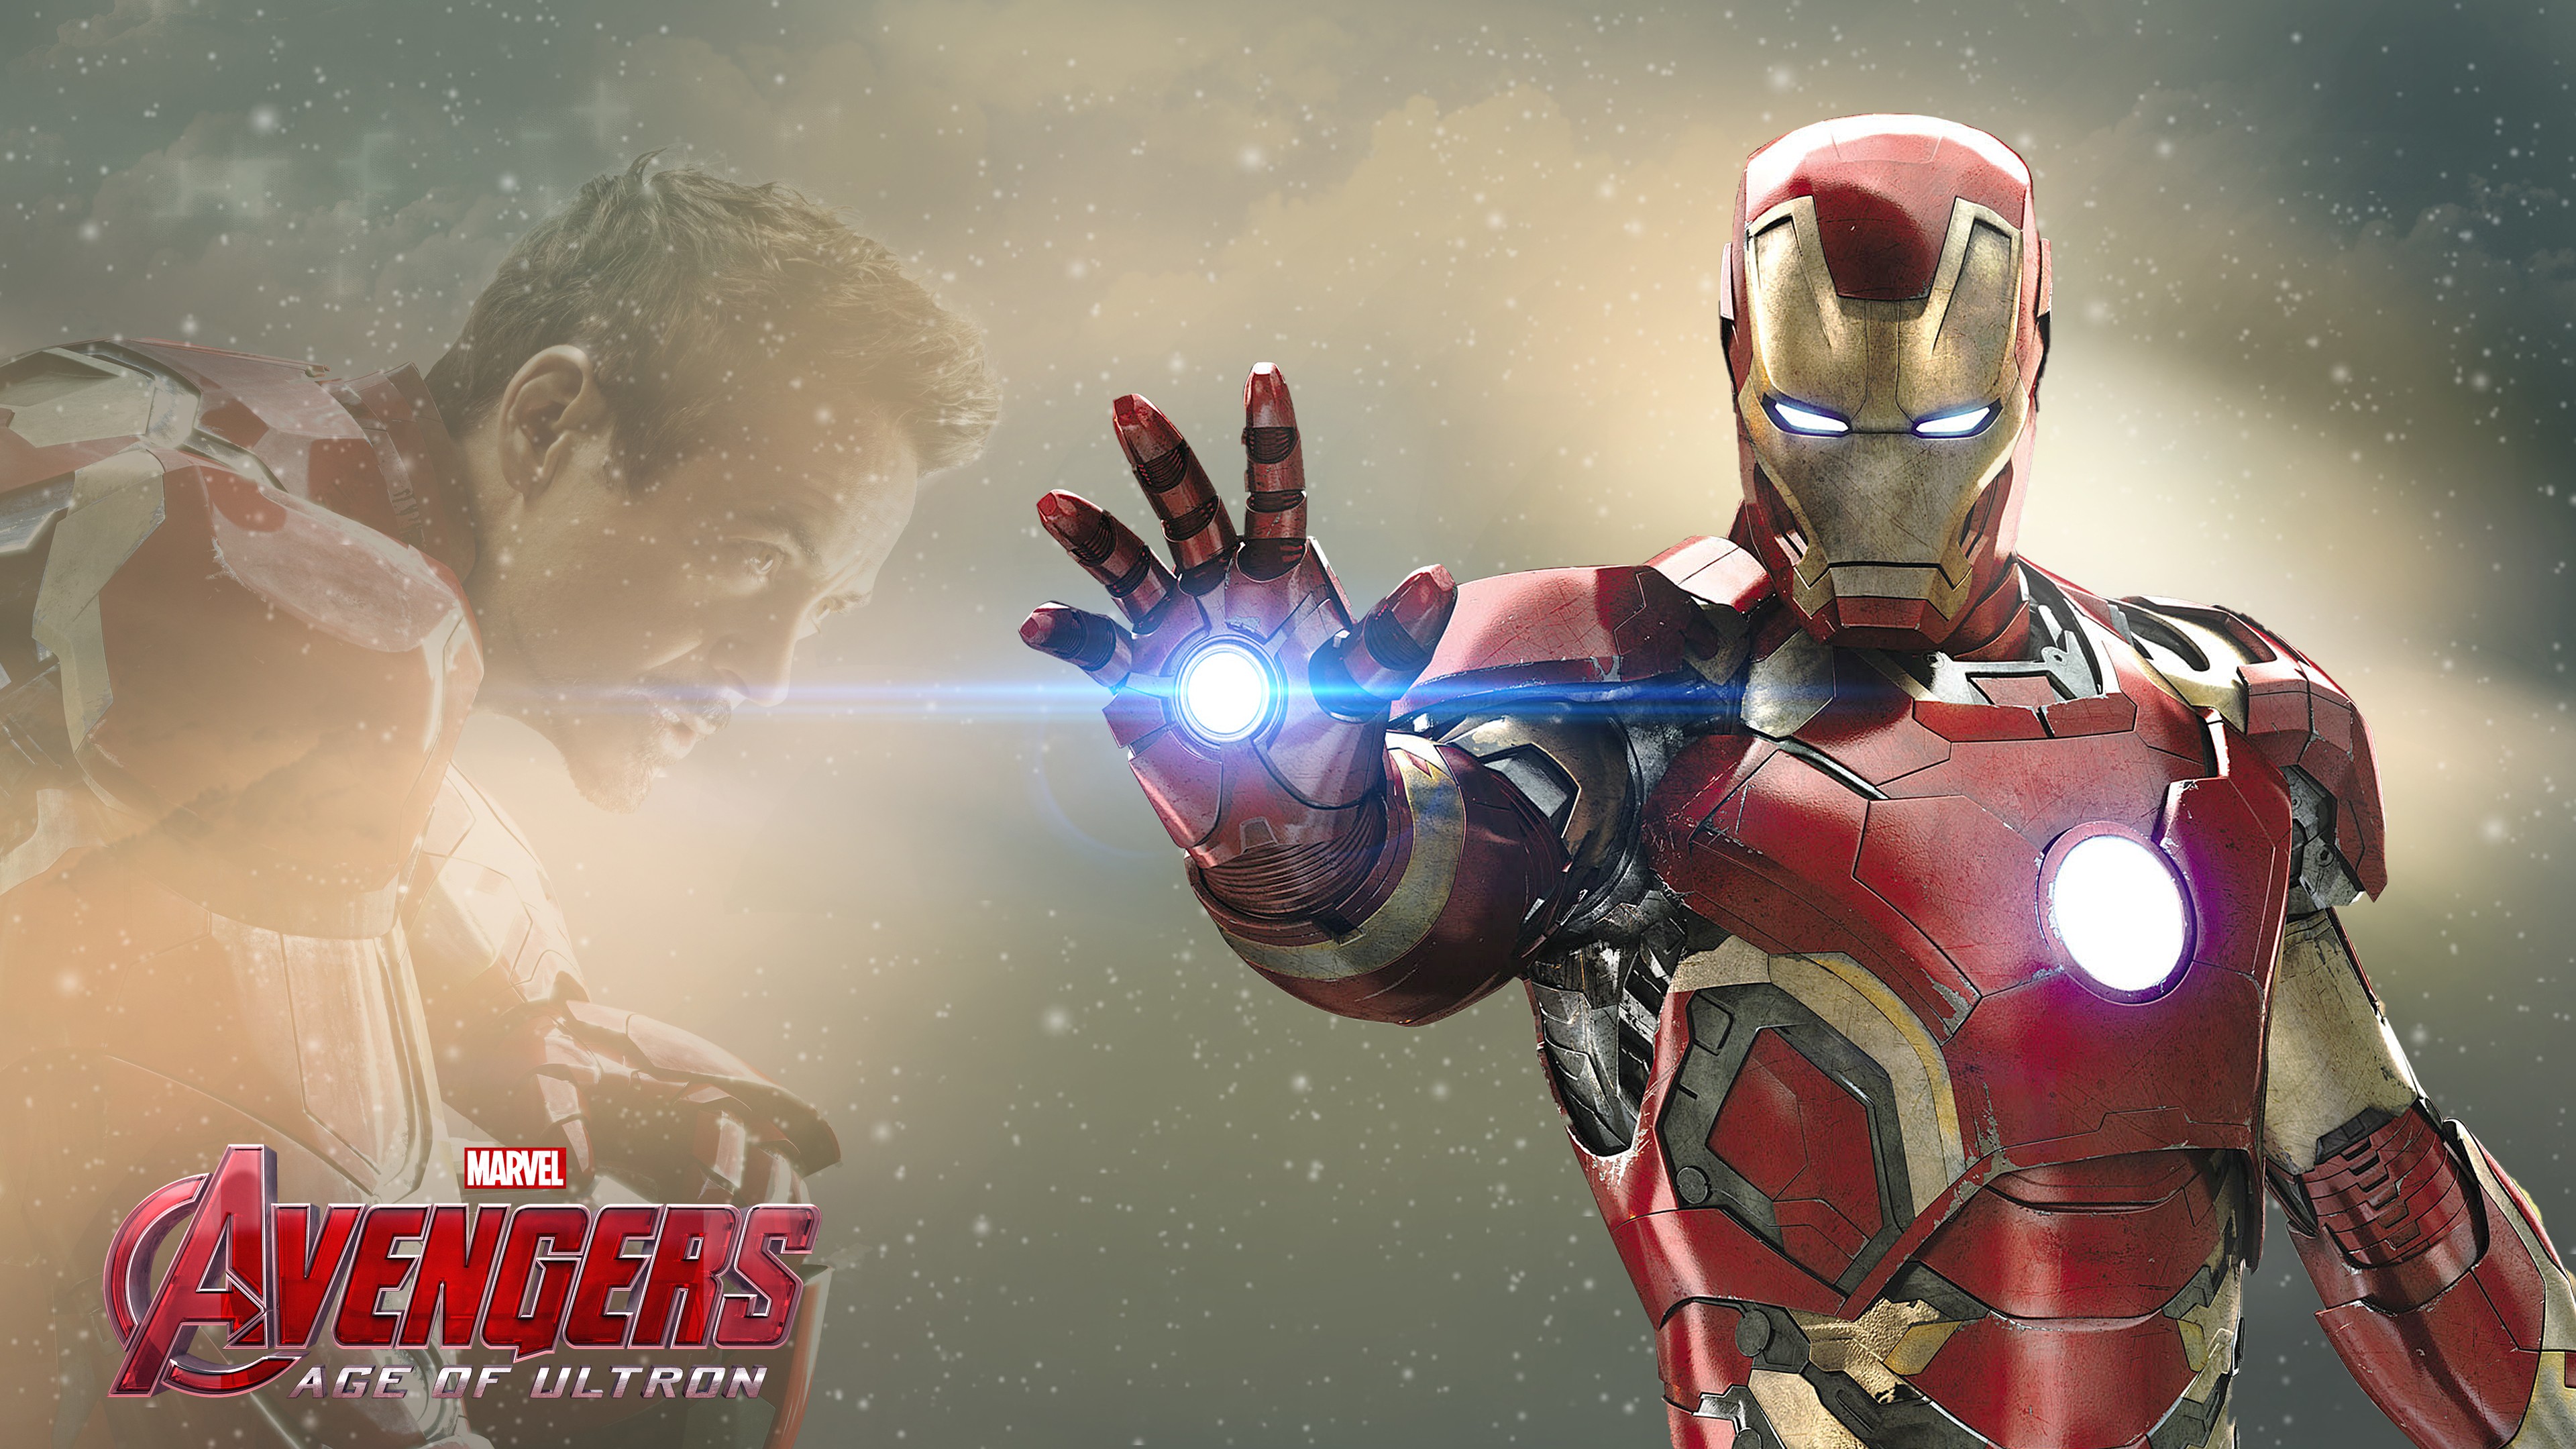 Wallpapers Iron Man Avengers movies on the desktop